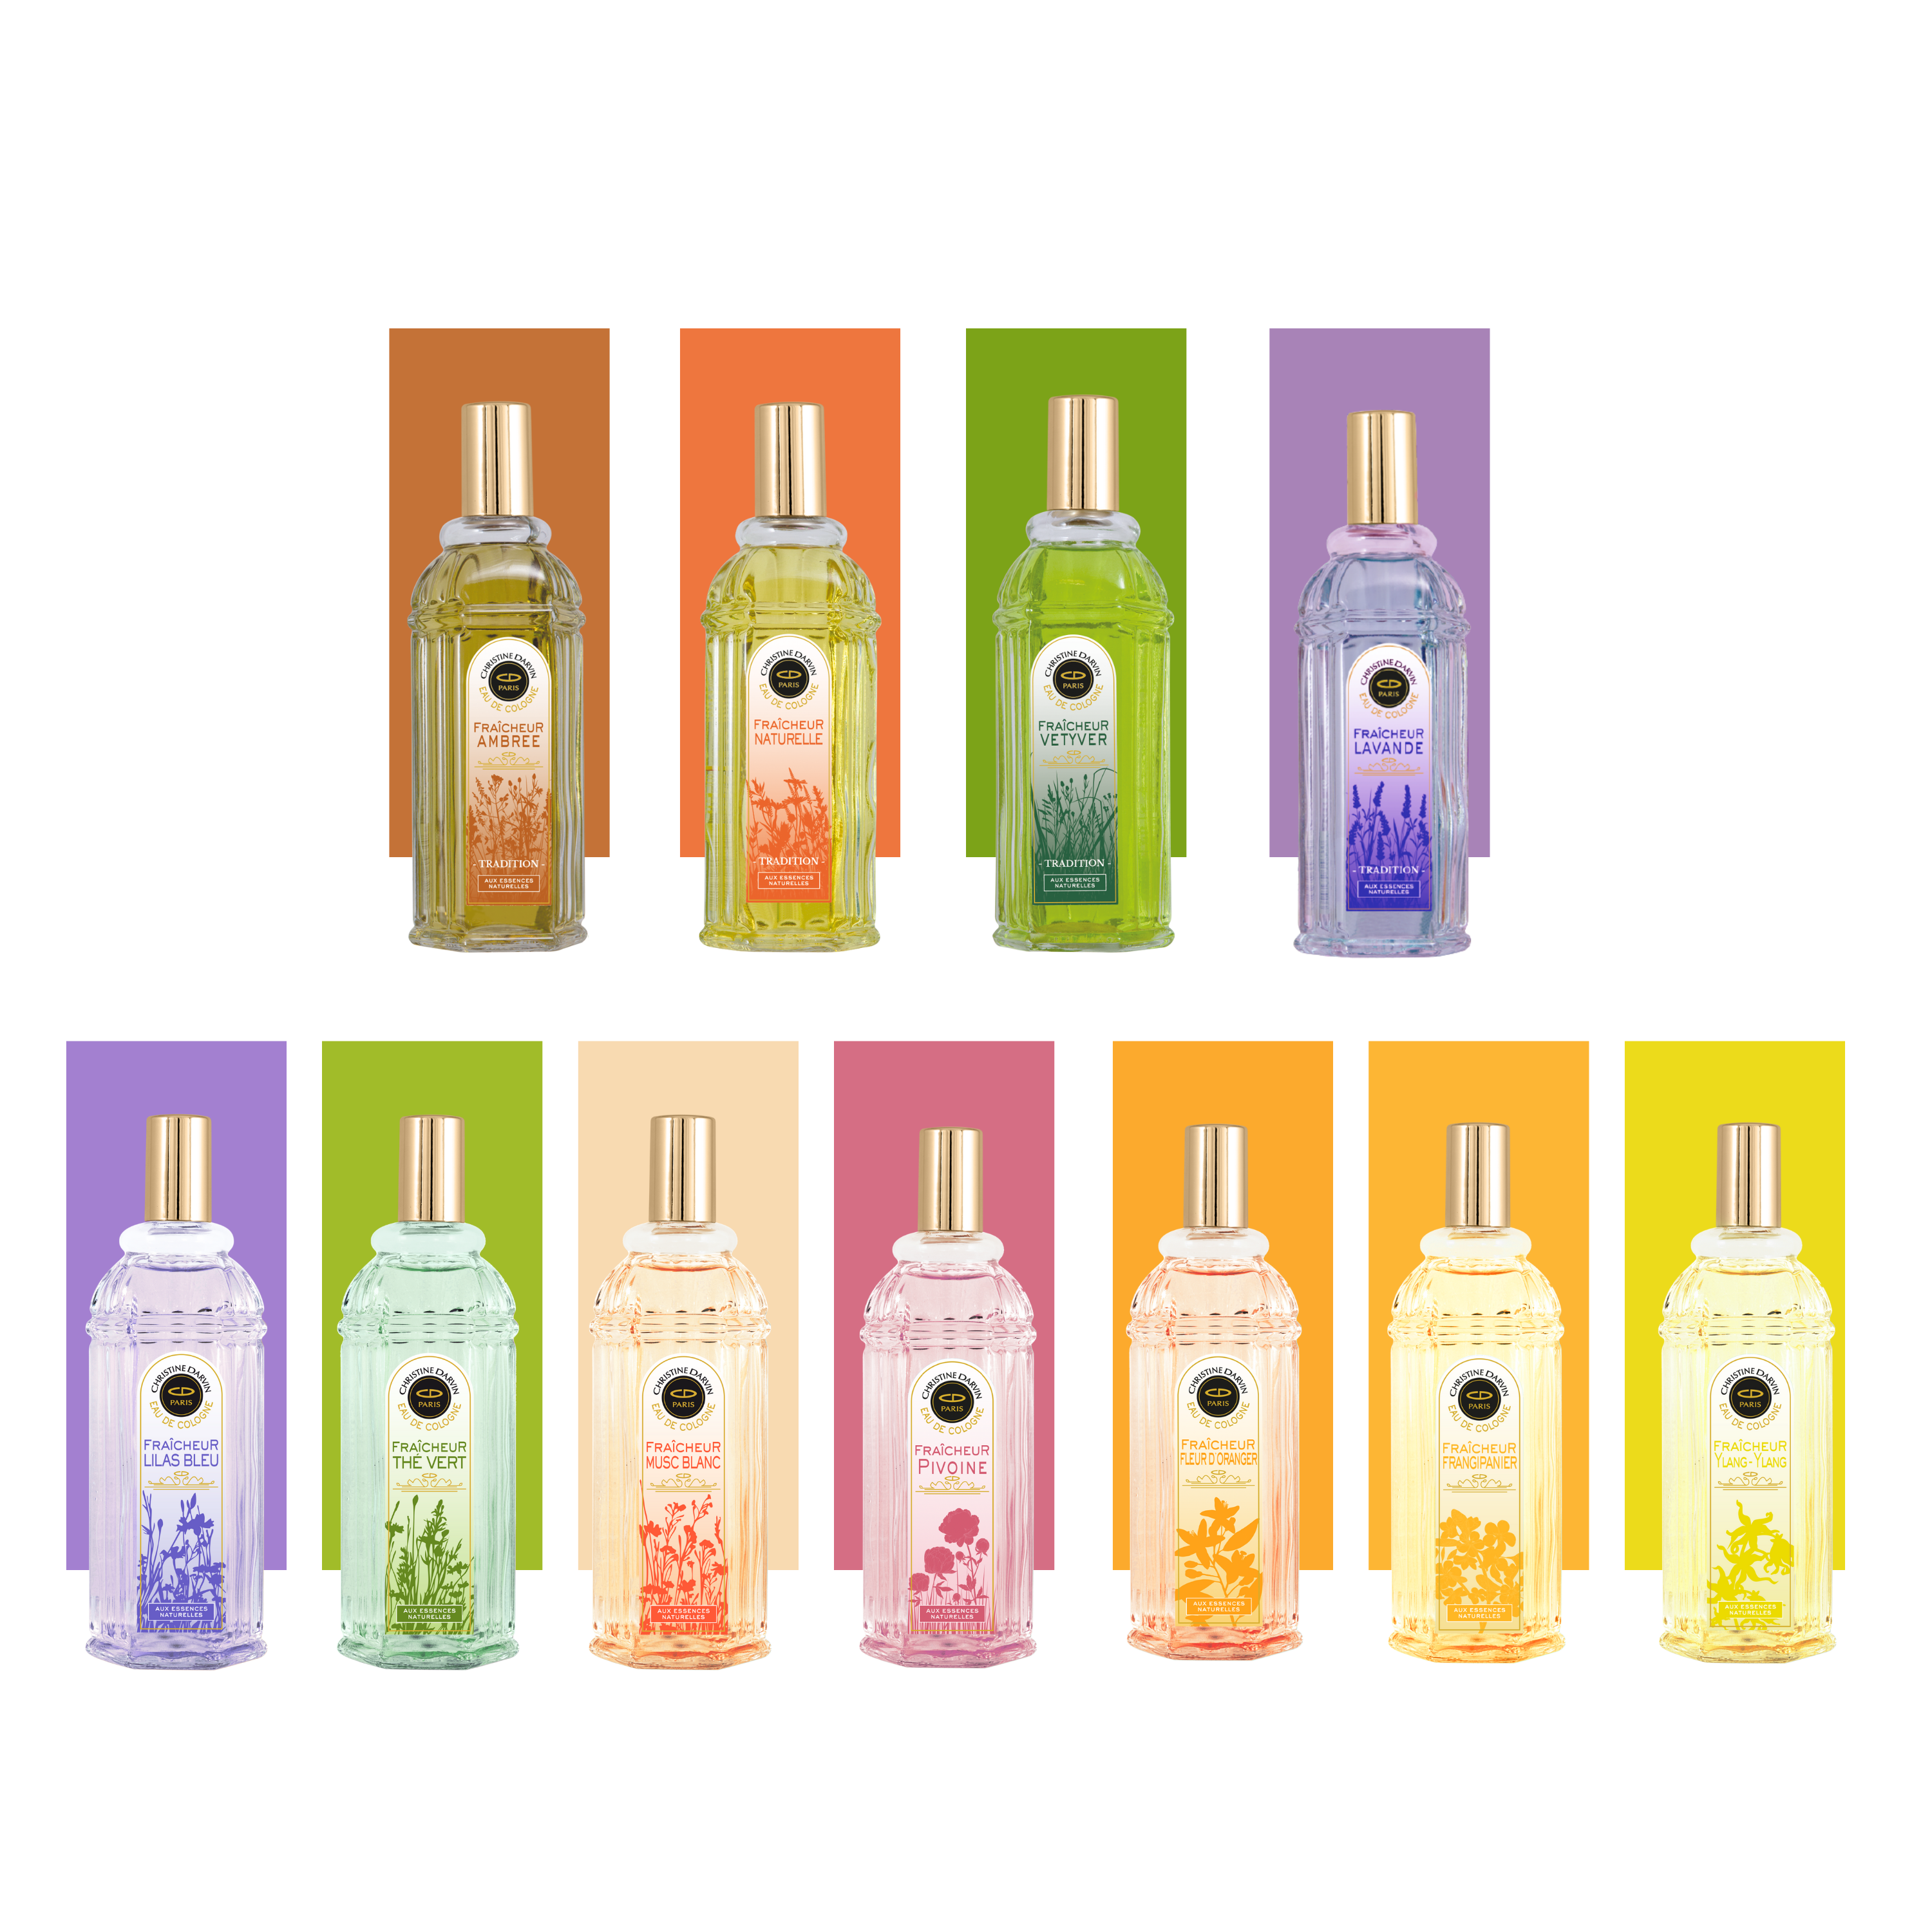 Choosing the best Eau de Cologne is based on knowledge of the fragrance notes, which come in top, middle and base notes, with a particular focus on citrus notes for summer freshness, and reflects not only individual preferences but also the personality, lifestyle and experiences of each individual.